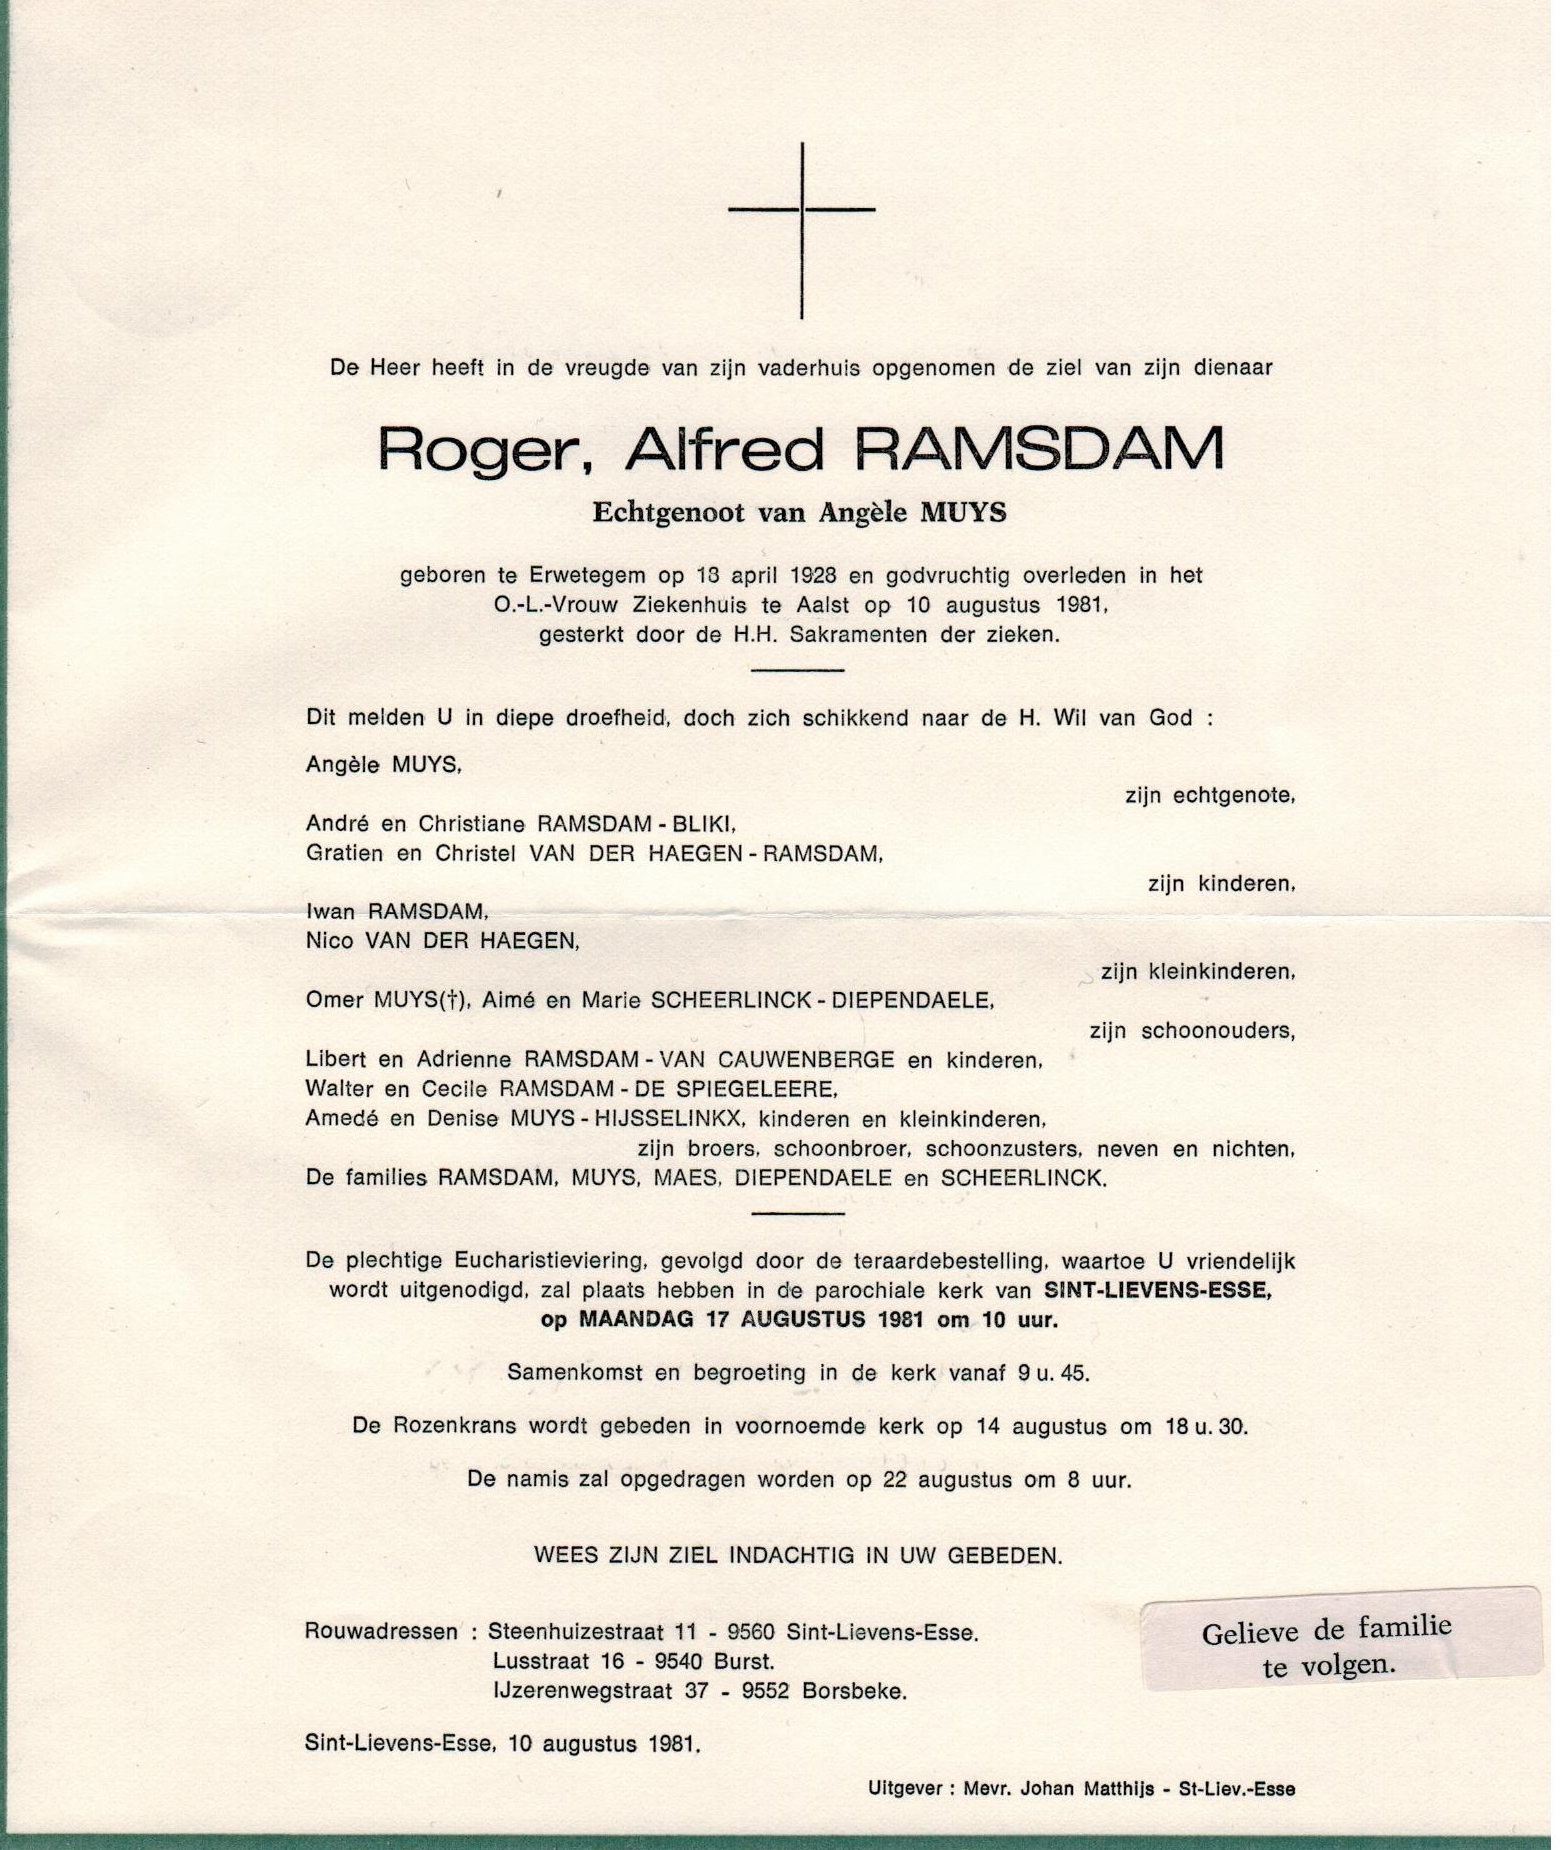 Ransdam Roger Alfred